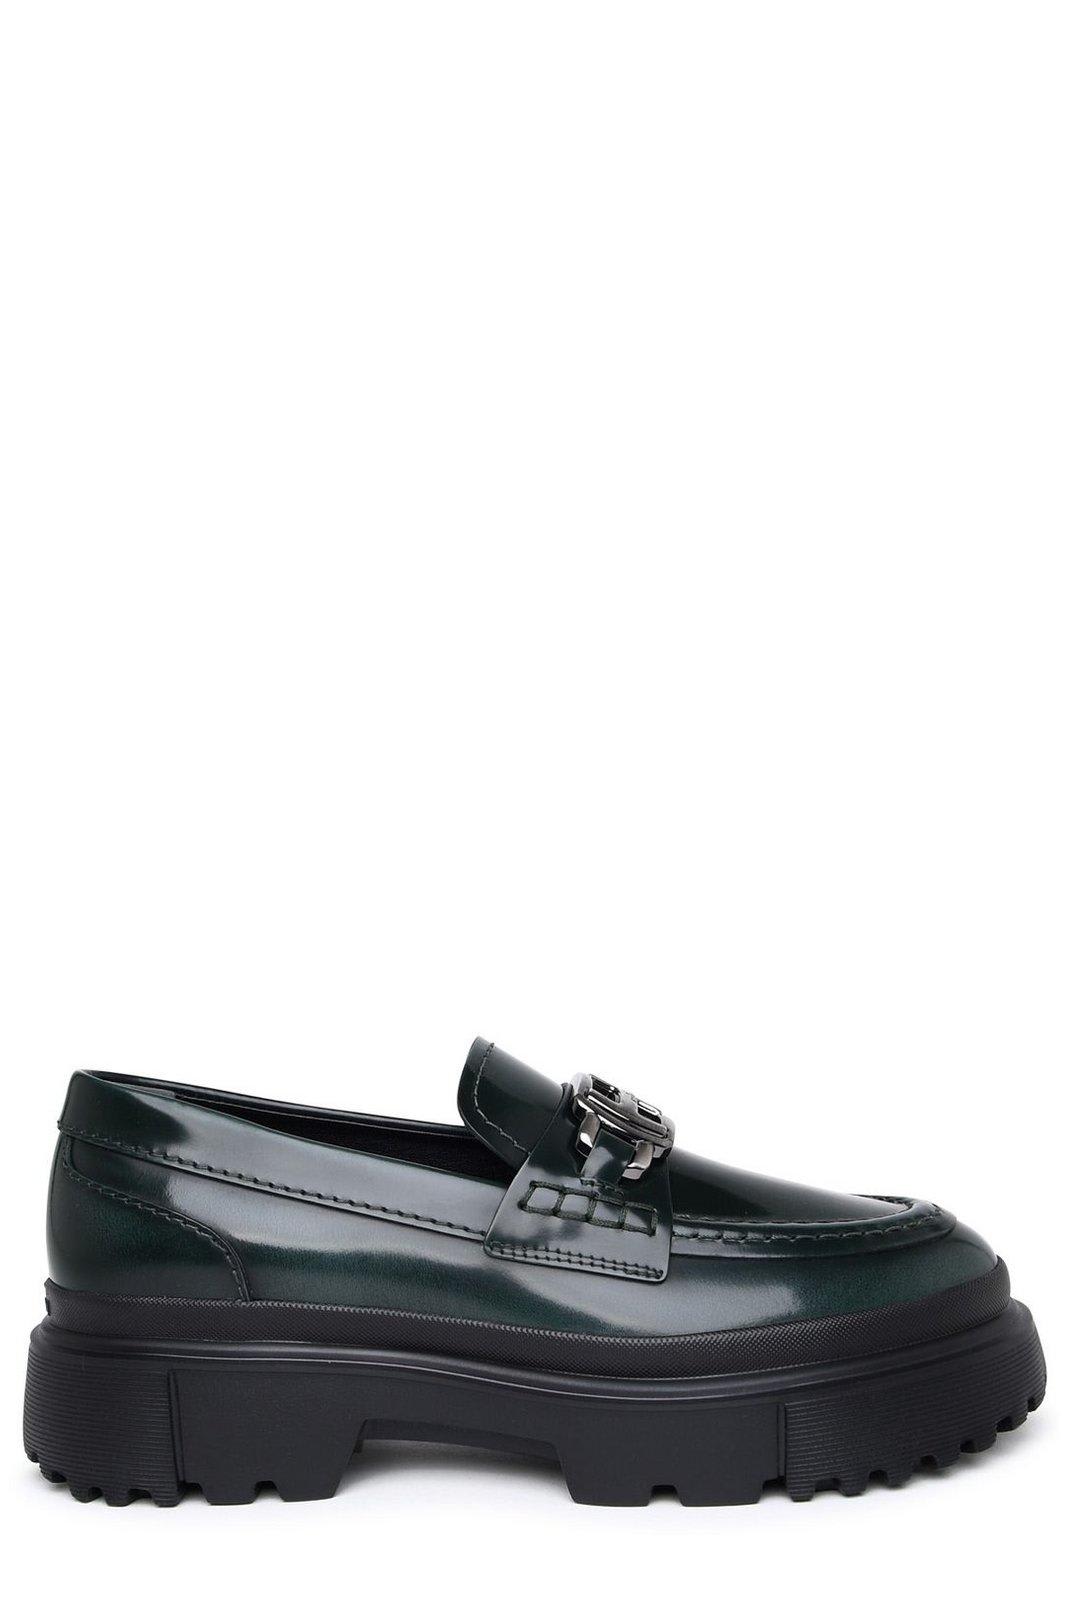 Shop Hogan H629 Slip-on Loafers In Green